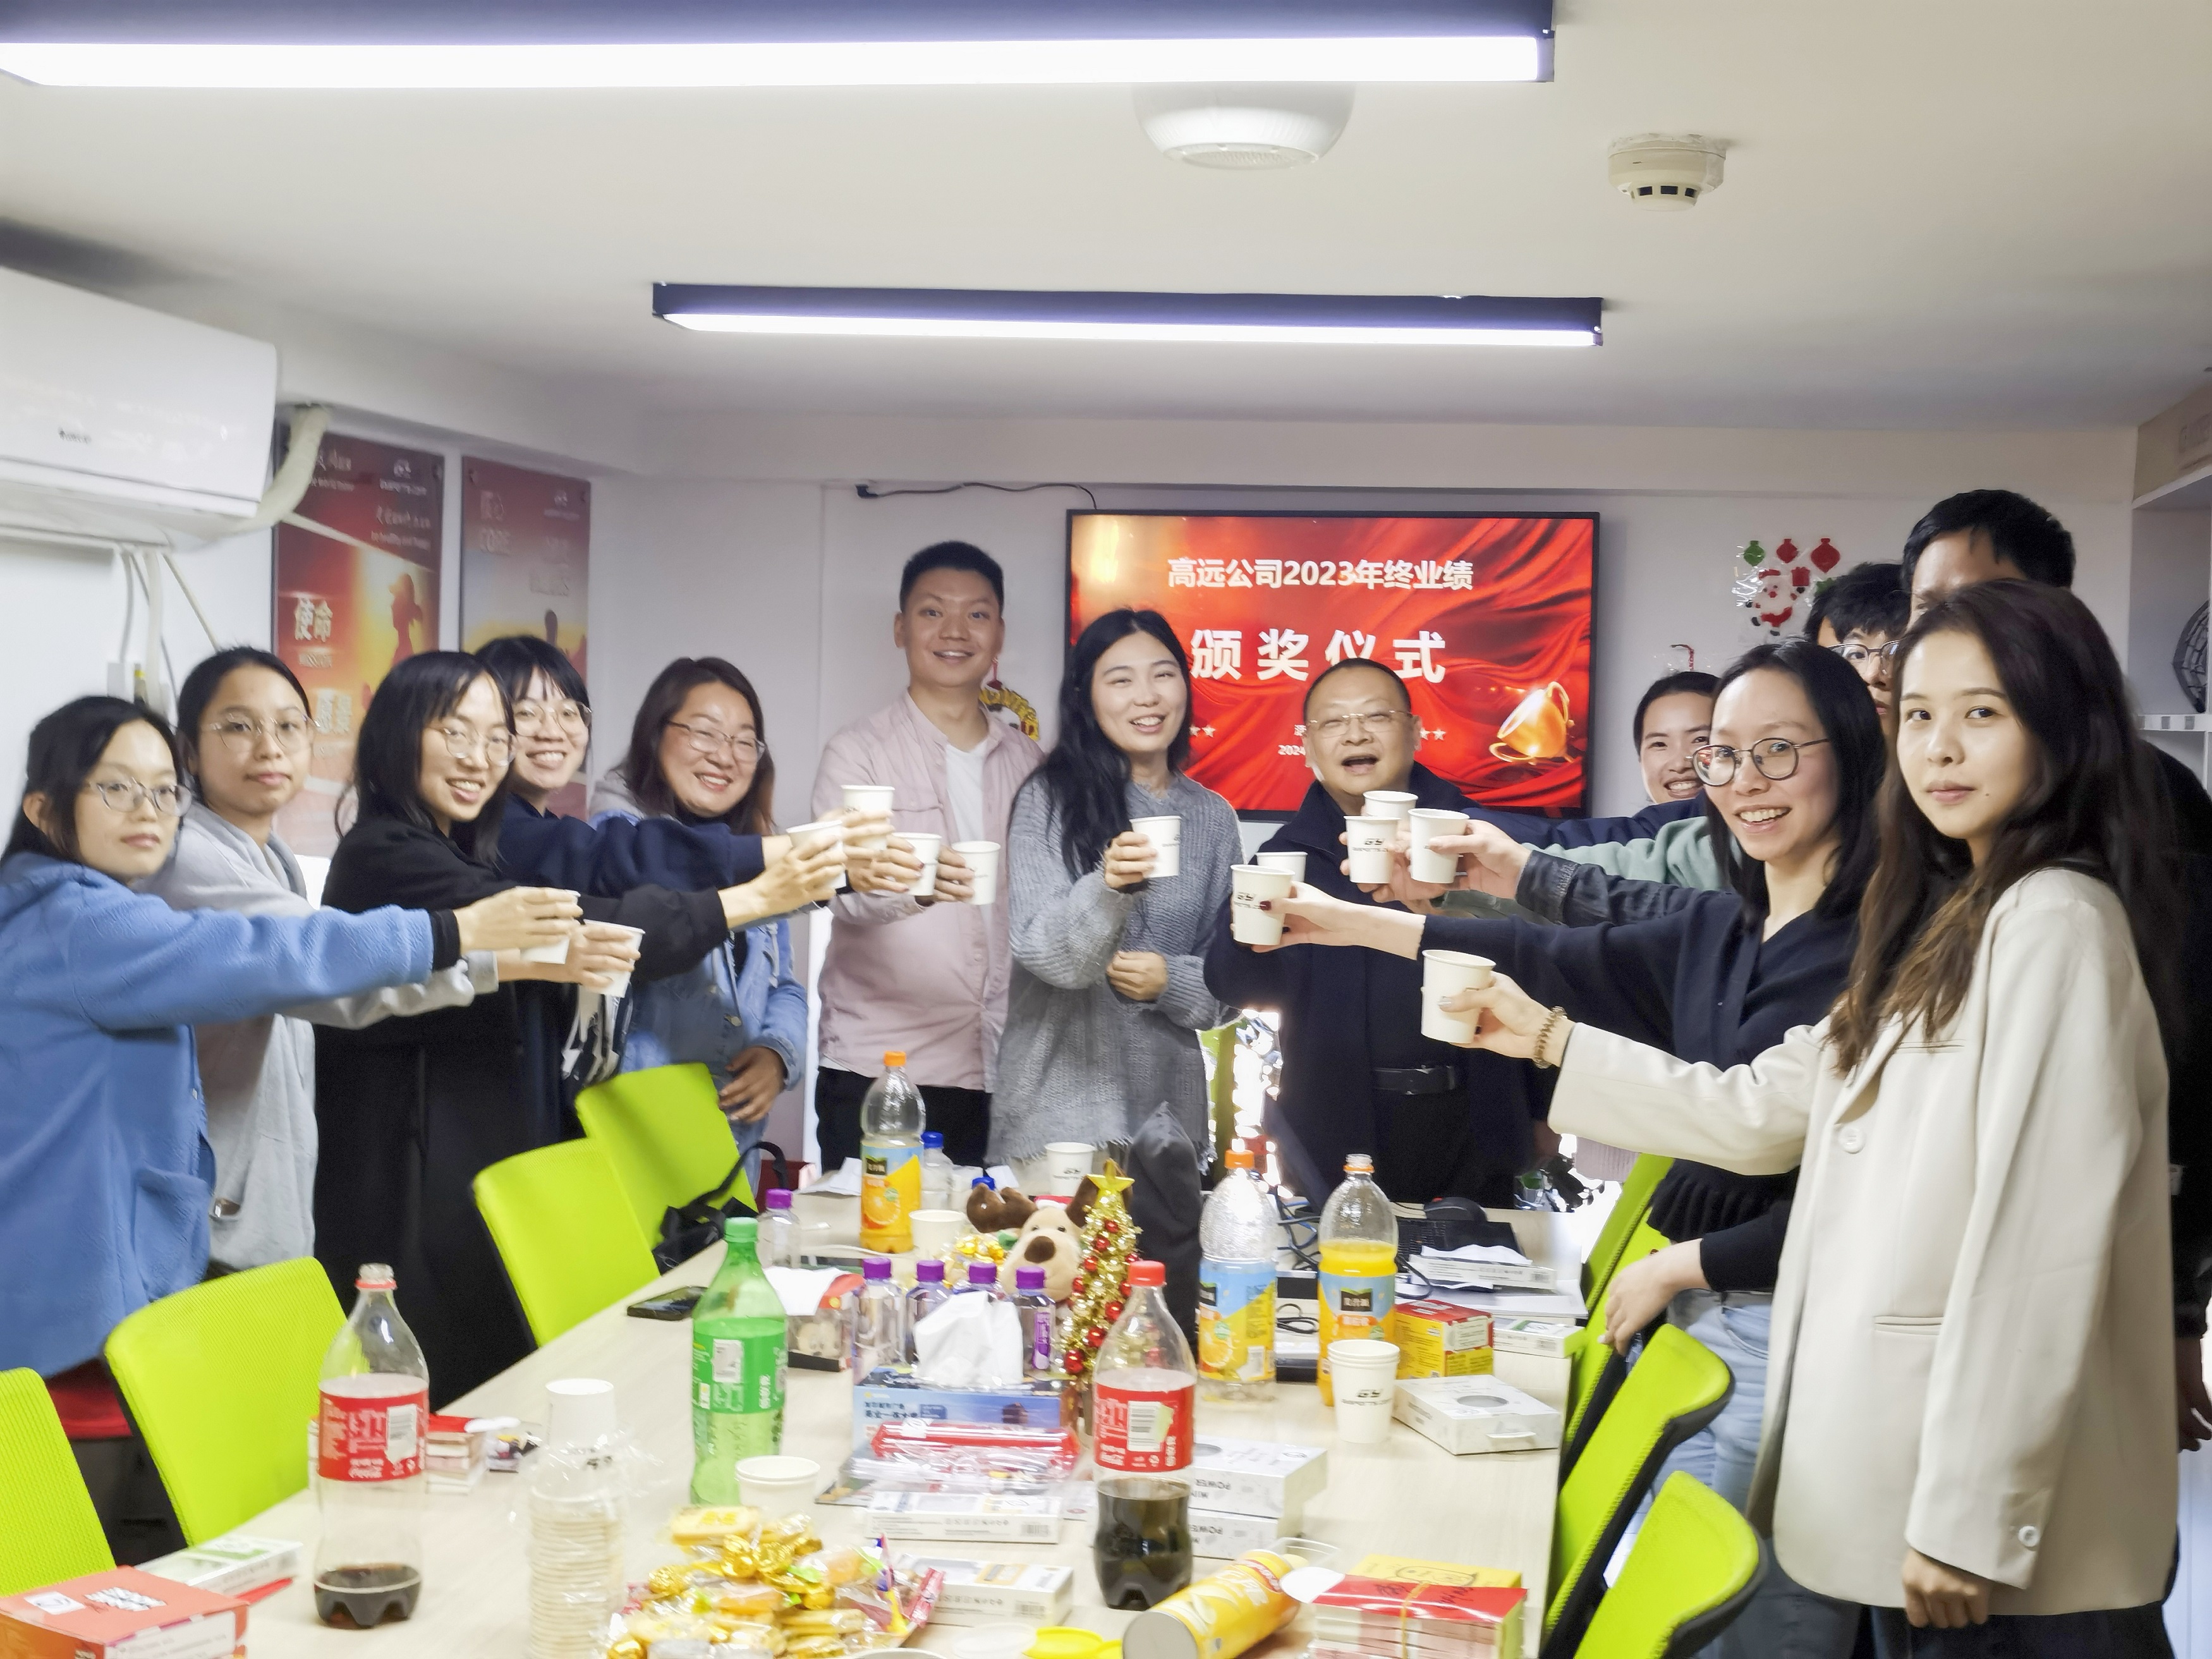 GY Company hosted the year-end performance commendation meeting for 2023, bringing in the New Year with a high level of morale among the employees.